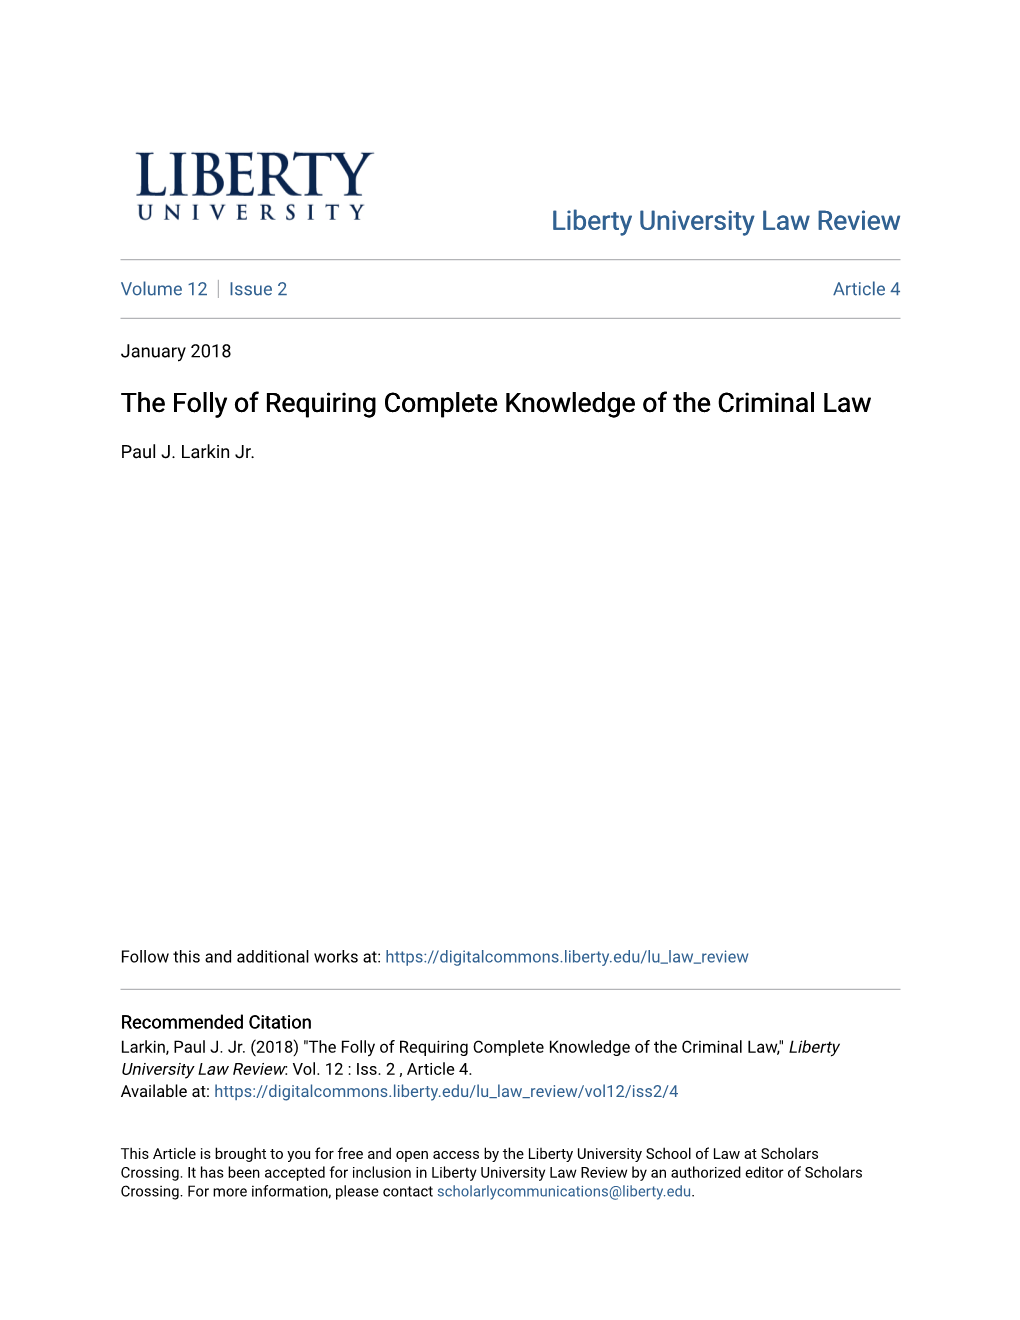 The Folly of Requiring Complete Knowledge of the Criminal Law